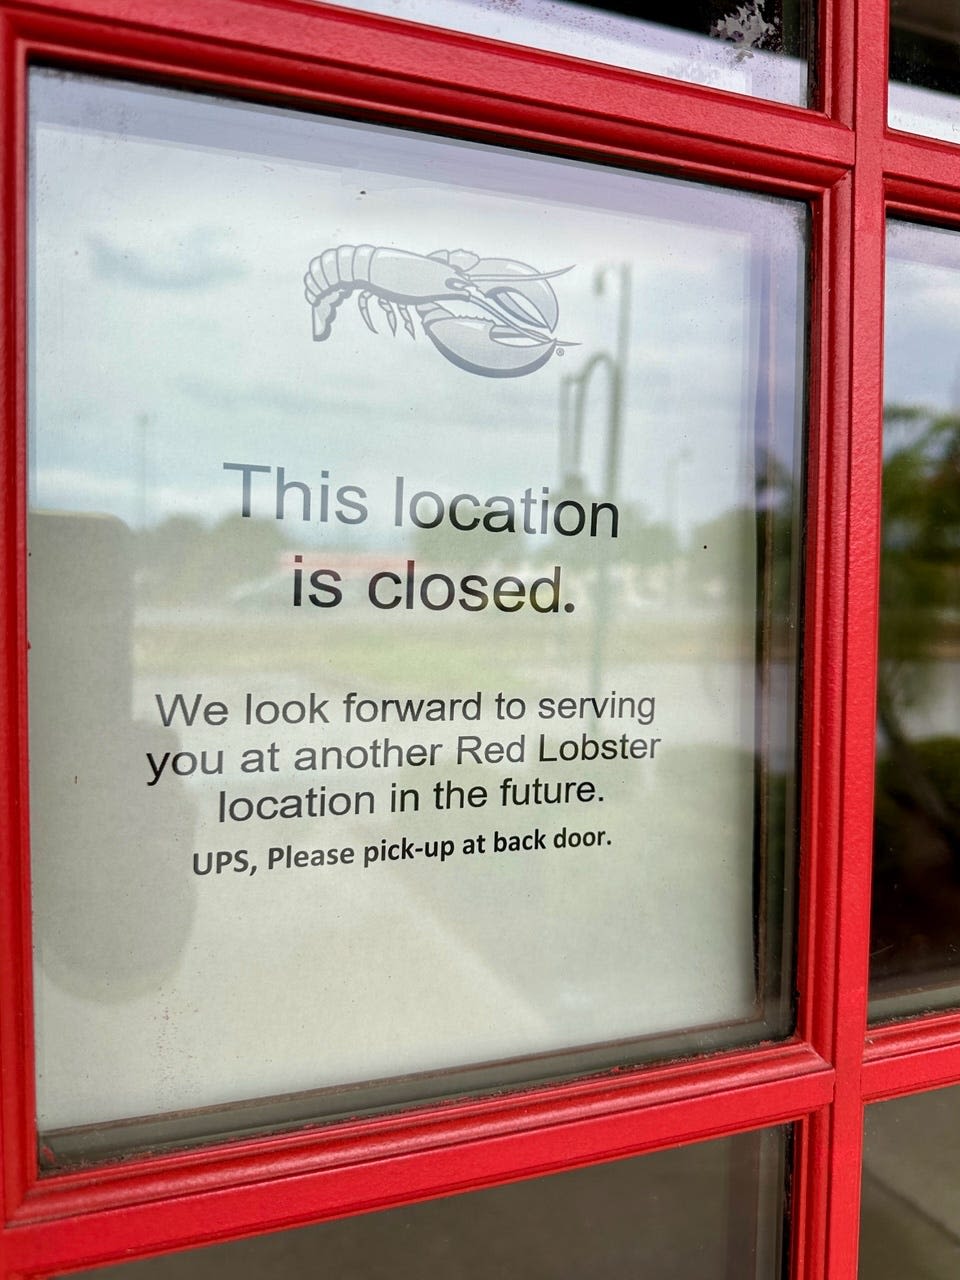 Red Lobster is closing nearly 50 locations, including at least 7 in Texas. See where.